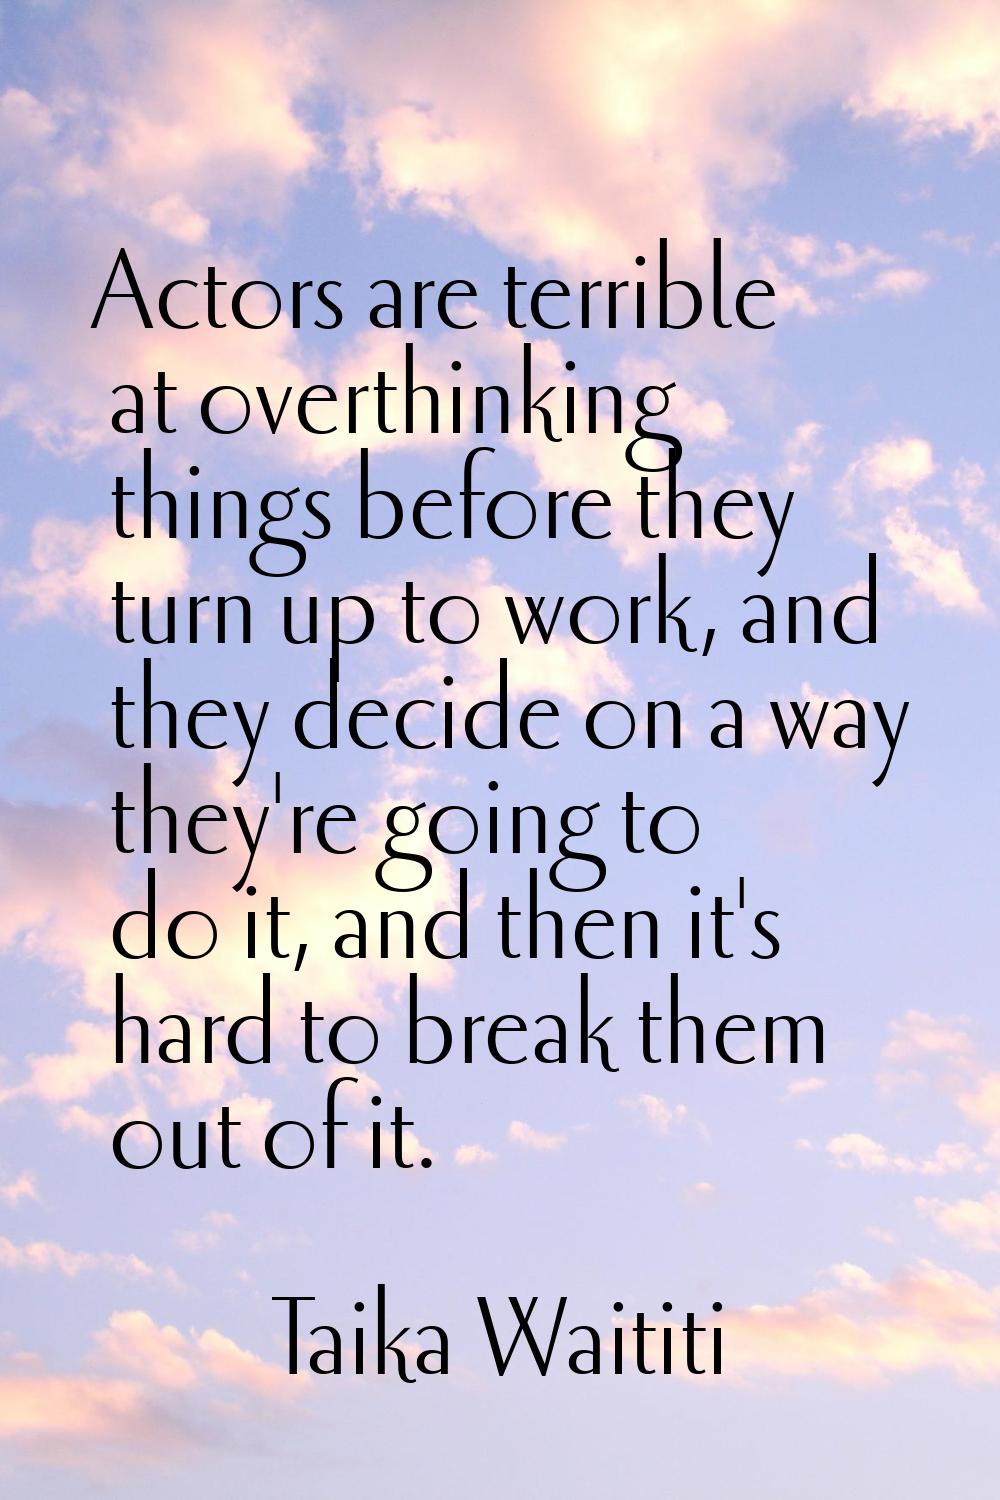 Actors are terrible at overthinking things before they turn up to work, and they decide on a way th